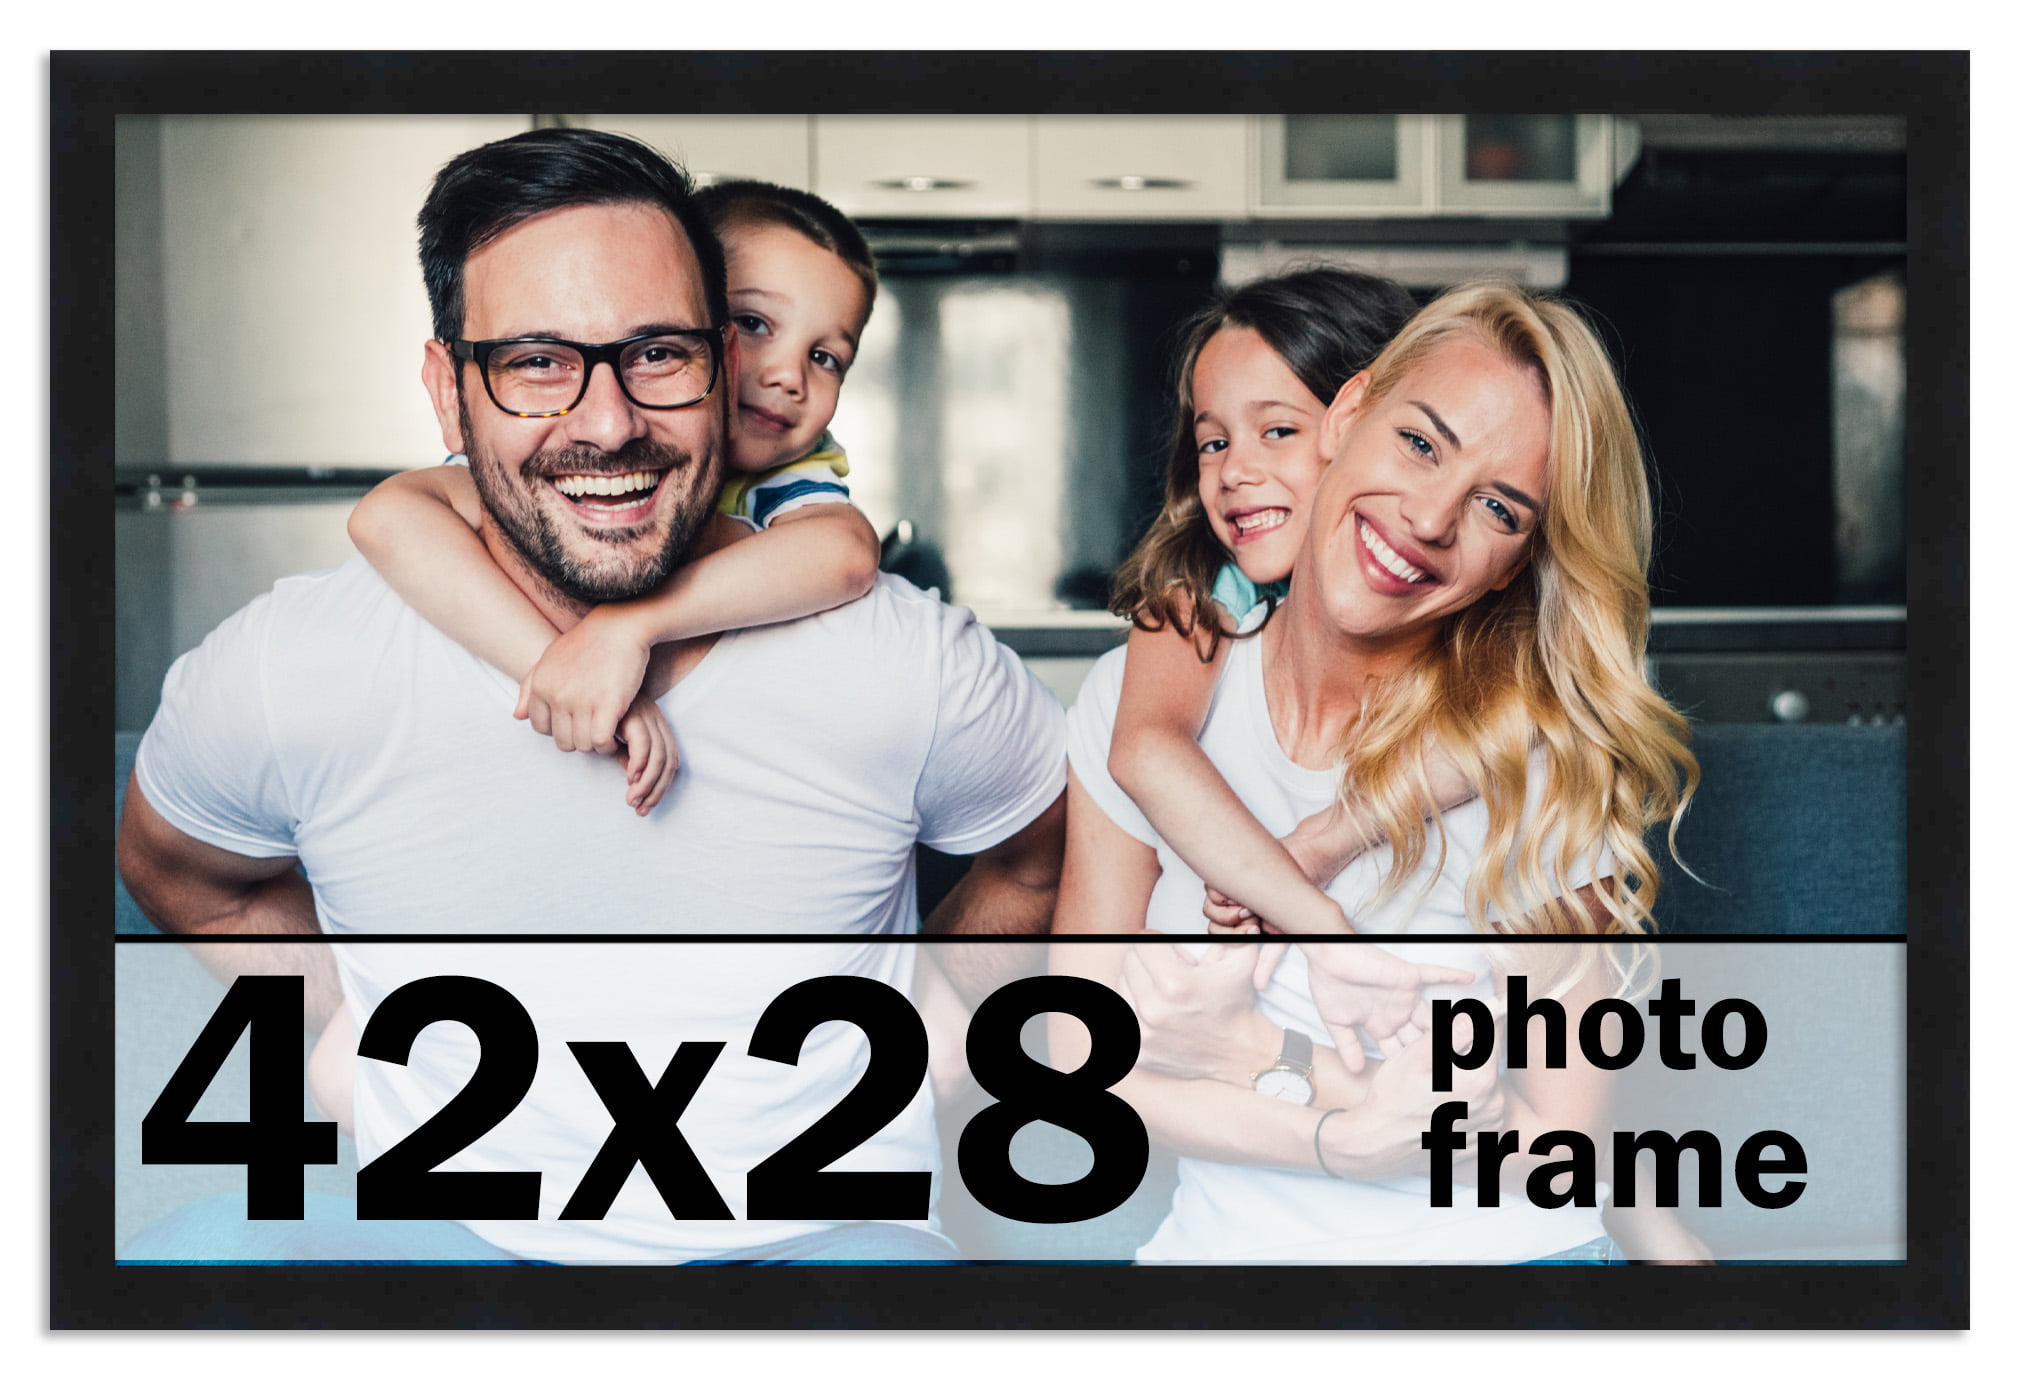 30x30 Frame Black Picture Frame - Modern Photo Frame Includes UV Acrylic  Shatter Guard Front, Acid Free Foam